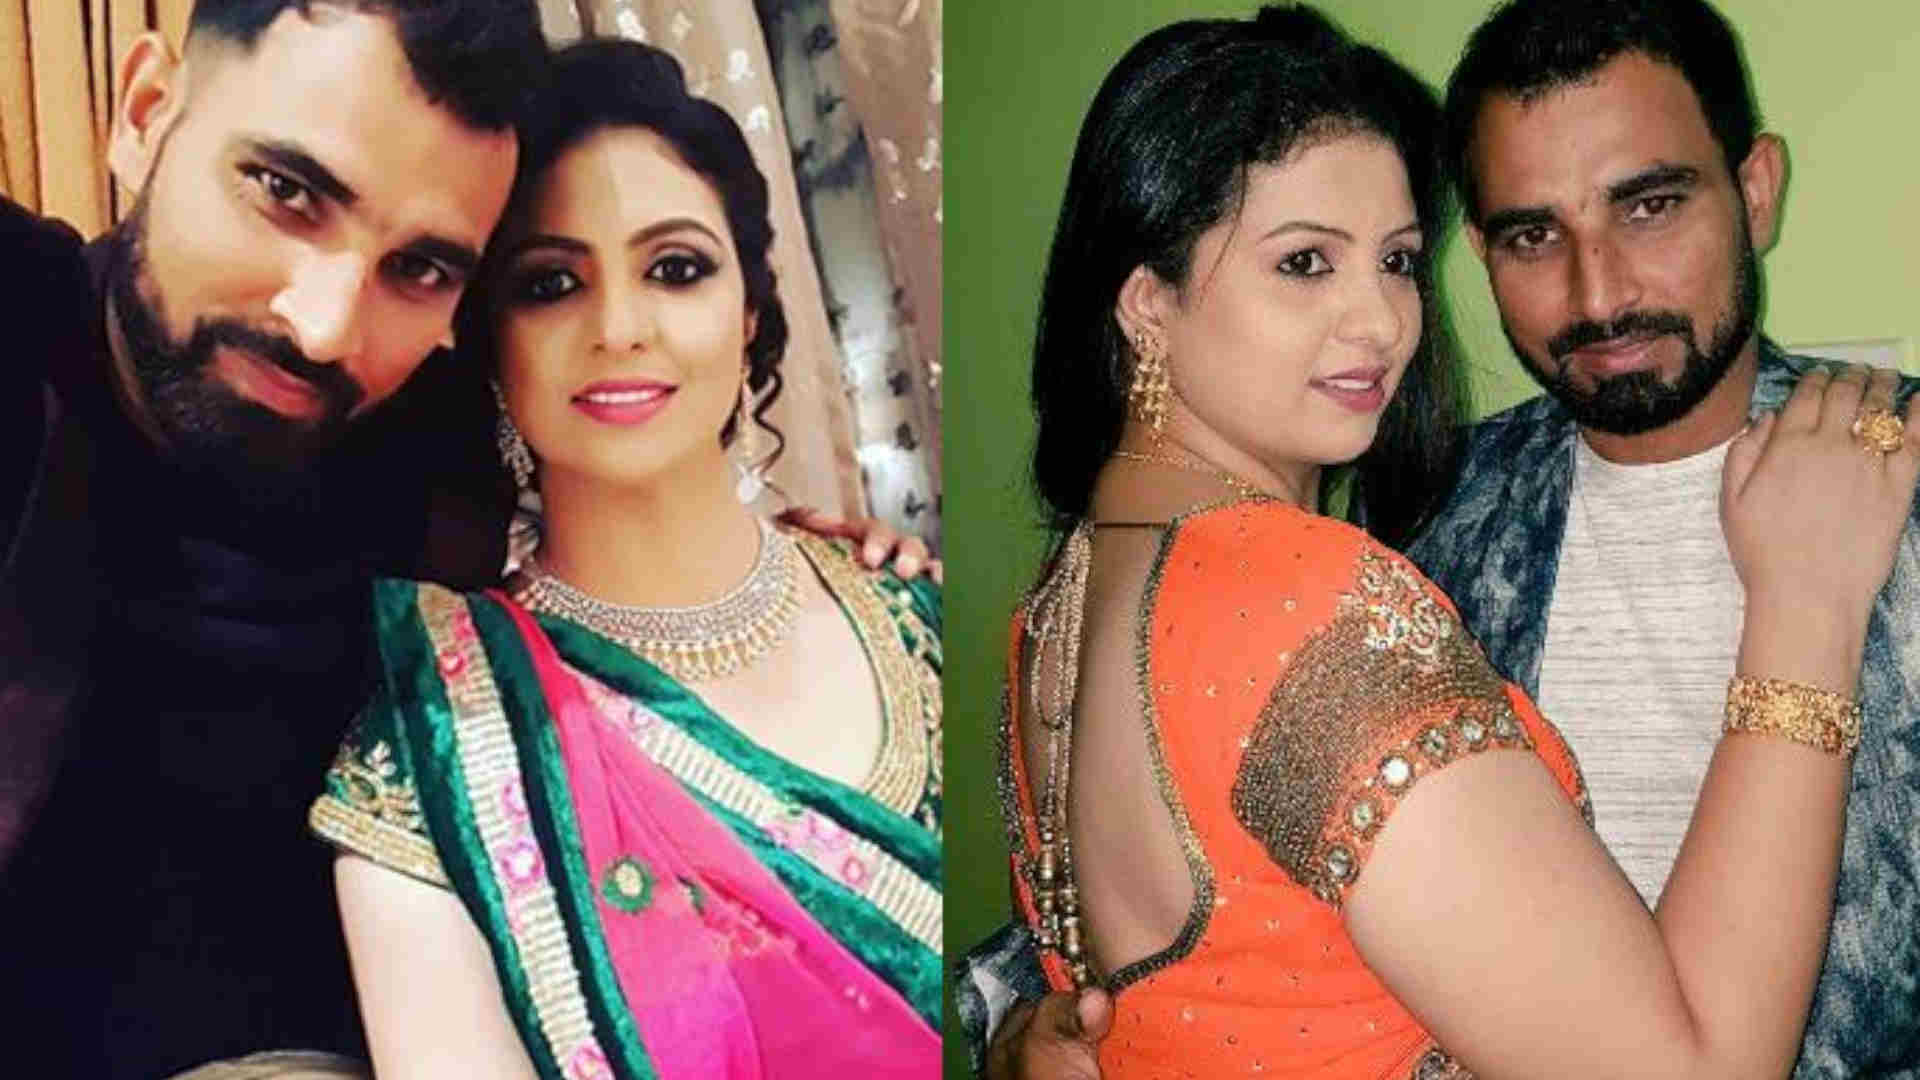 fast-bowler-mohammed-shami-has-been-given-a-blow-by-the-court-wife-hasin-jahan-has-to-pay-this-much-allowance-every-month-82116